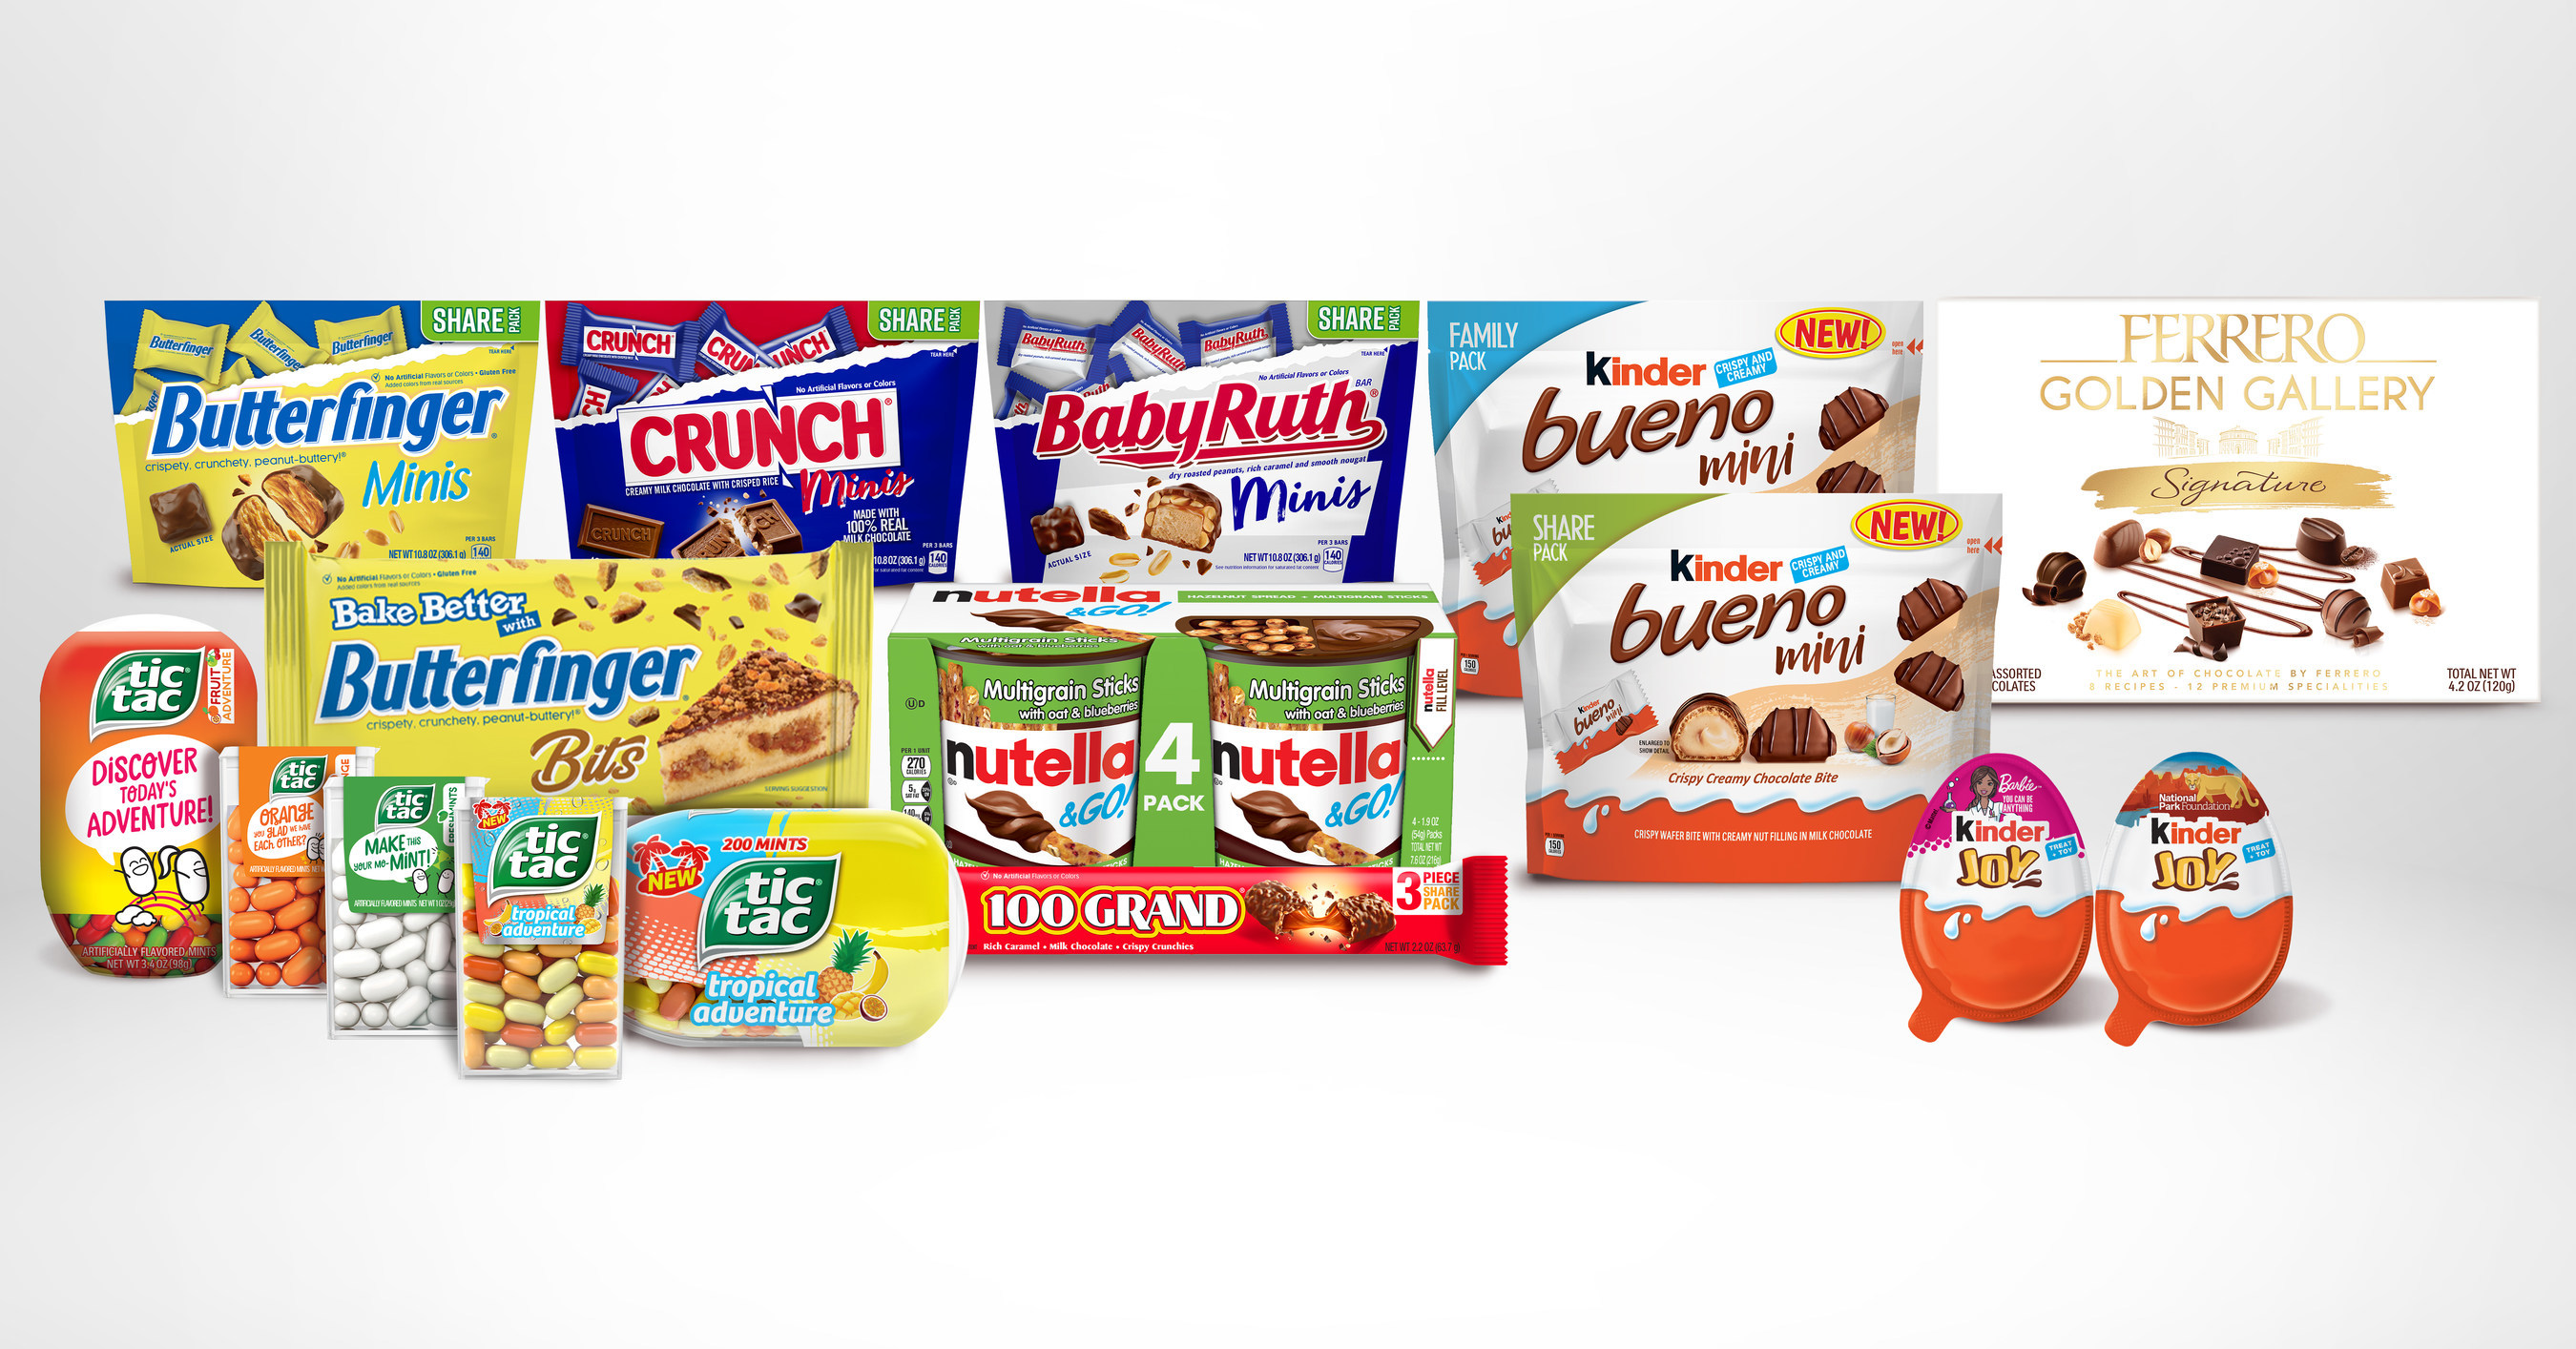 Ferrero North America announces innovations and initiatives across its  brand portfolio at Sweets & Snacks Expo